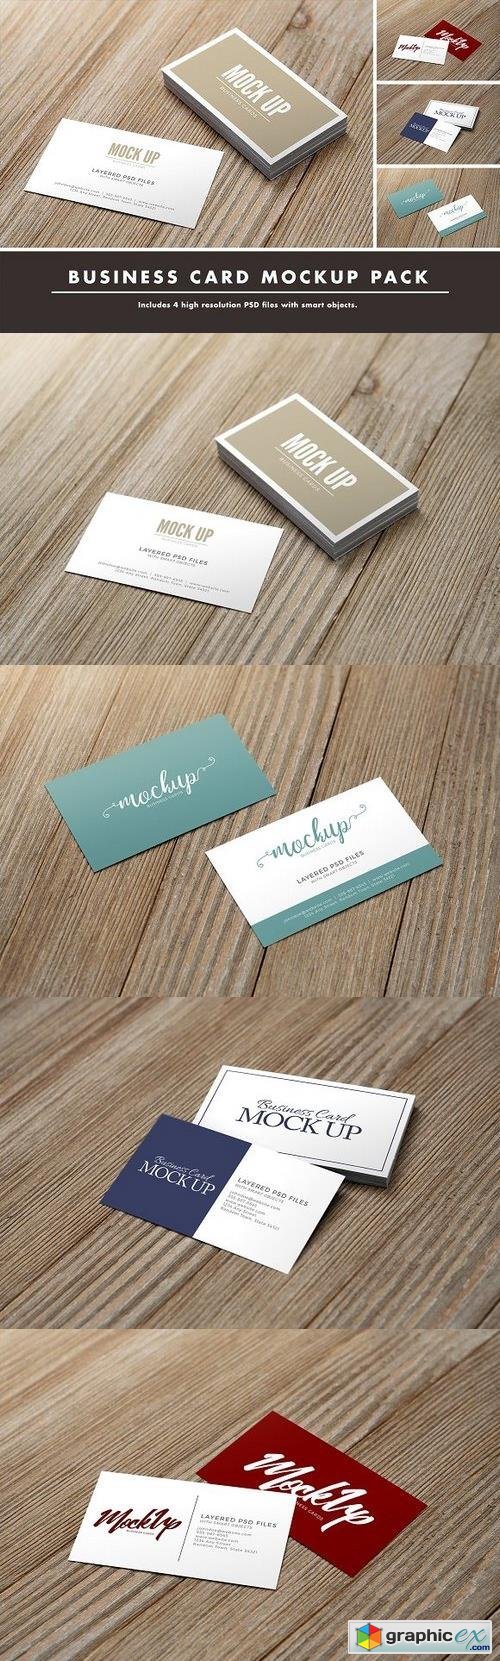 Business Card Mockup Pack on Wood